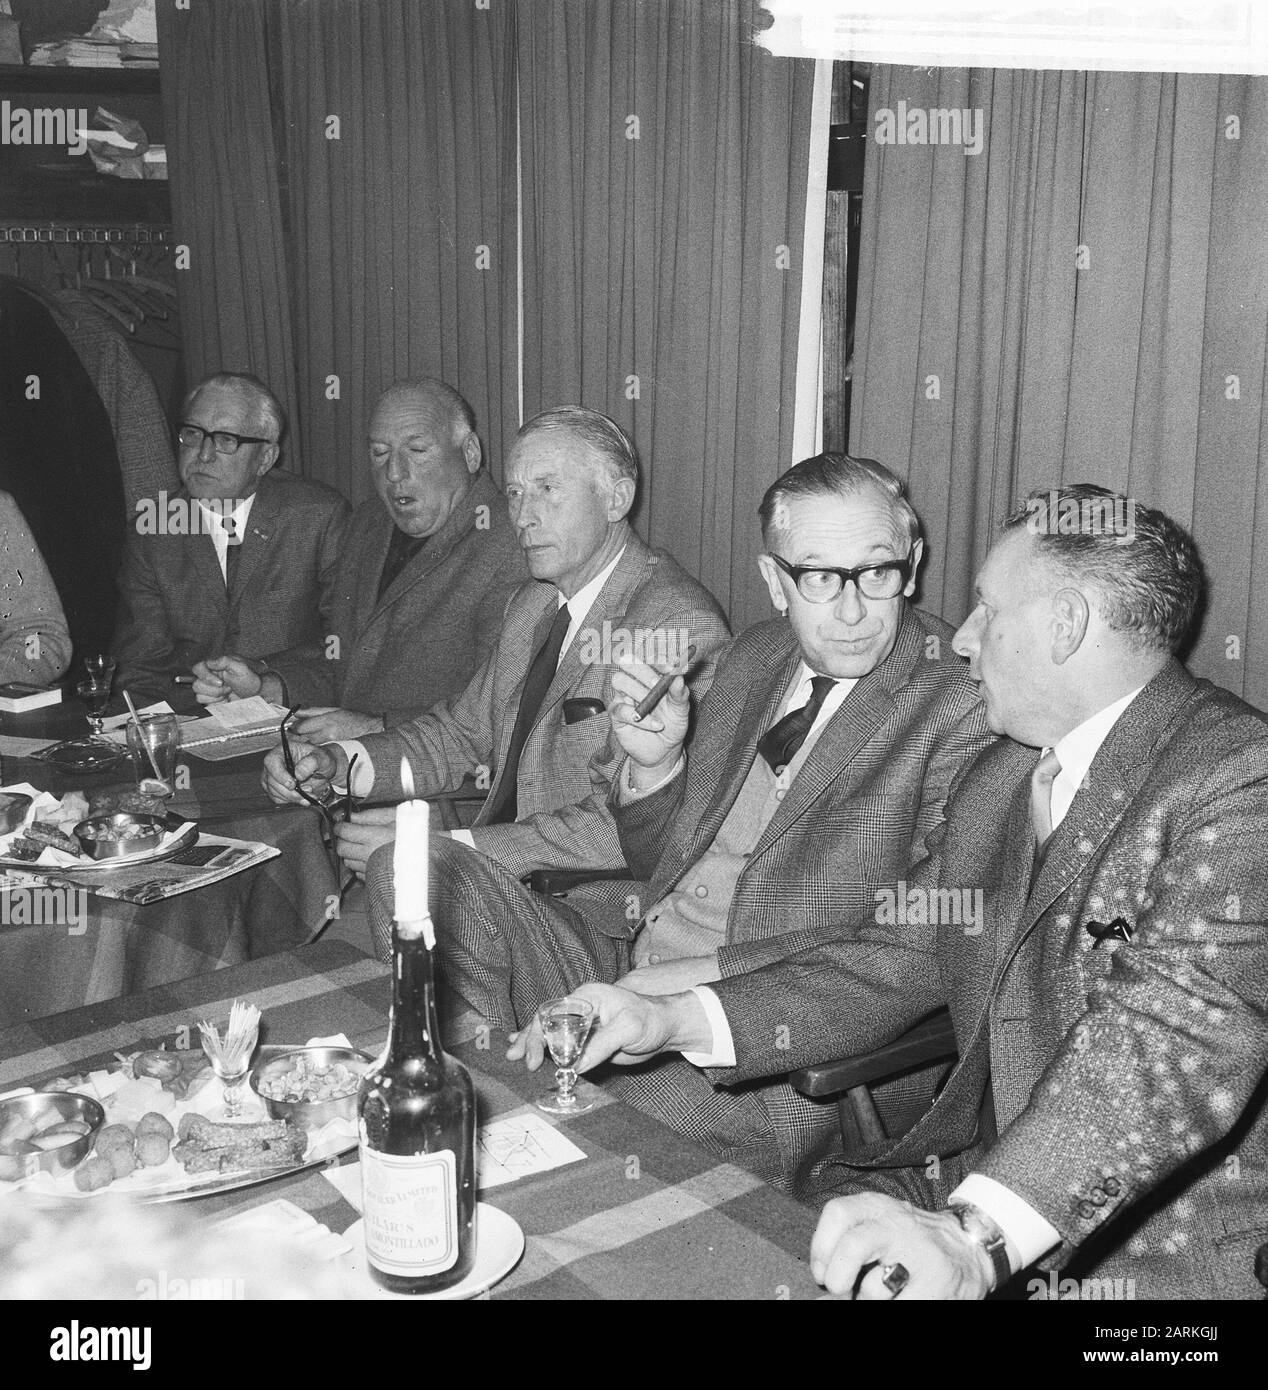 Association Club der Hundred (fish); cozy meeting Date: December 16, 1965 Keywords: alcoholic beverages, gatherings, associations Stock Photo